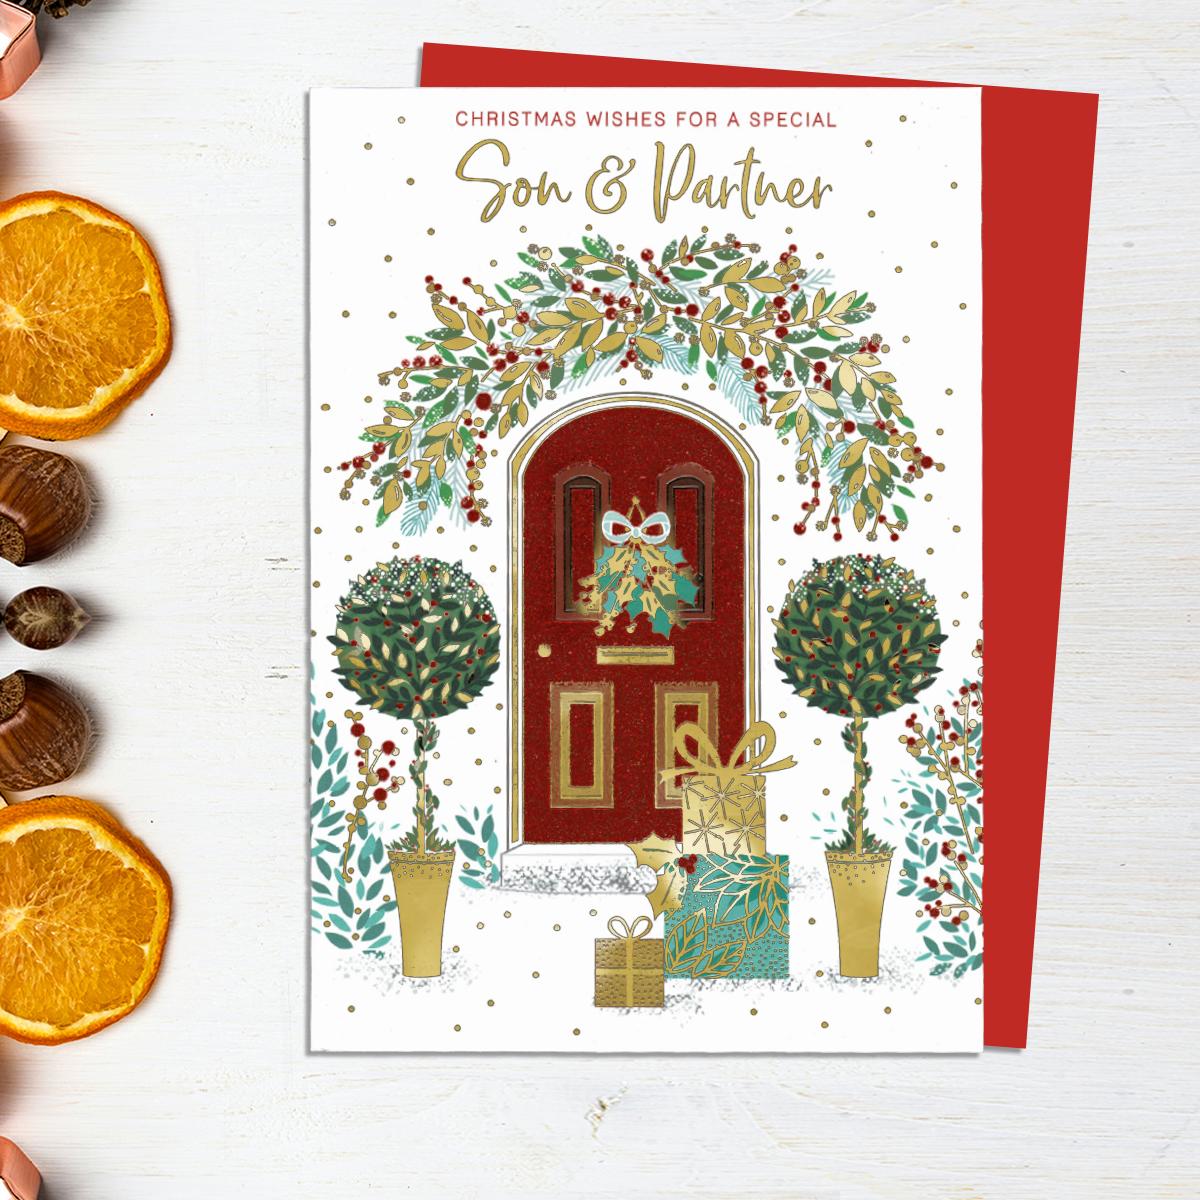 Christmas Wishes For A Special Son & Partner Showing A Beautifully Decorated Front Door With Garlands, Bay Trees And Gifts. Gold Foil  Lettering And Red Glitter Finishes This Card. Complete With Red Envelope